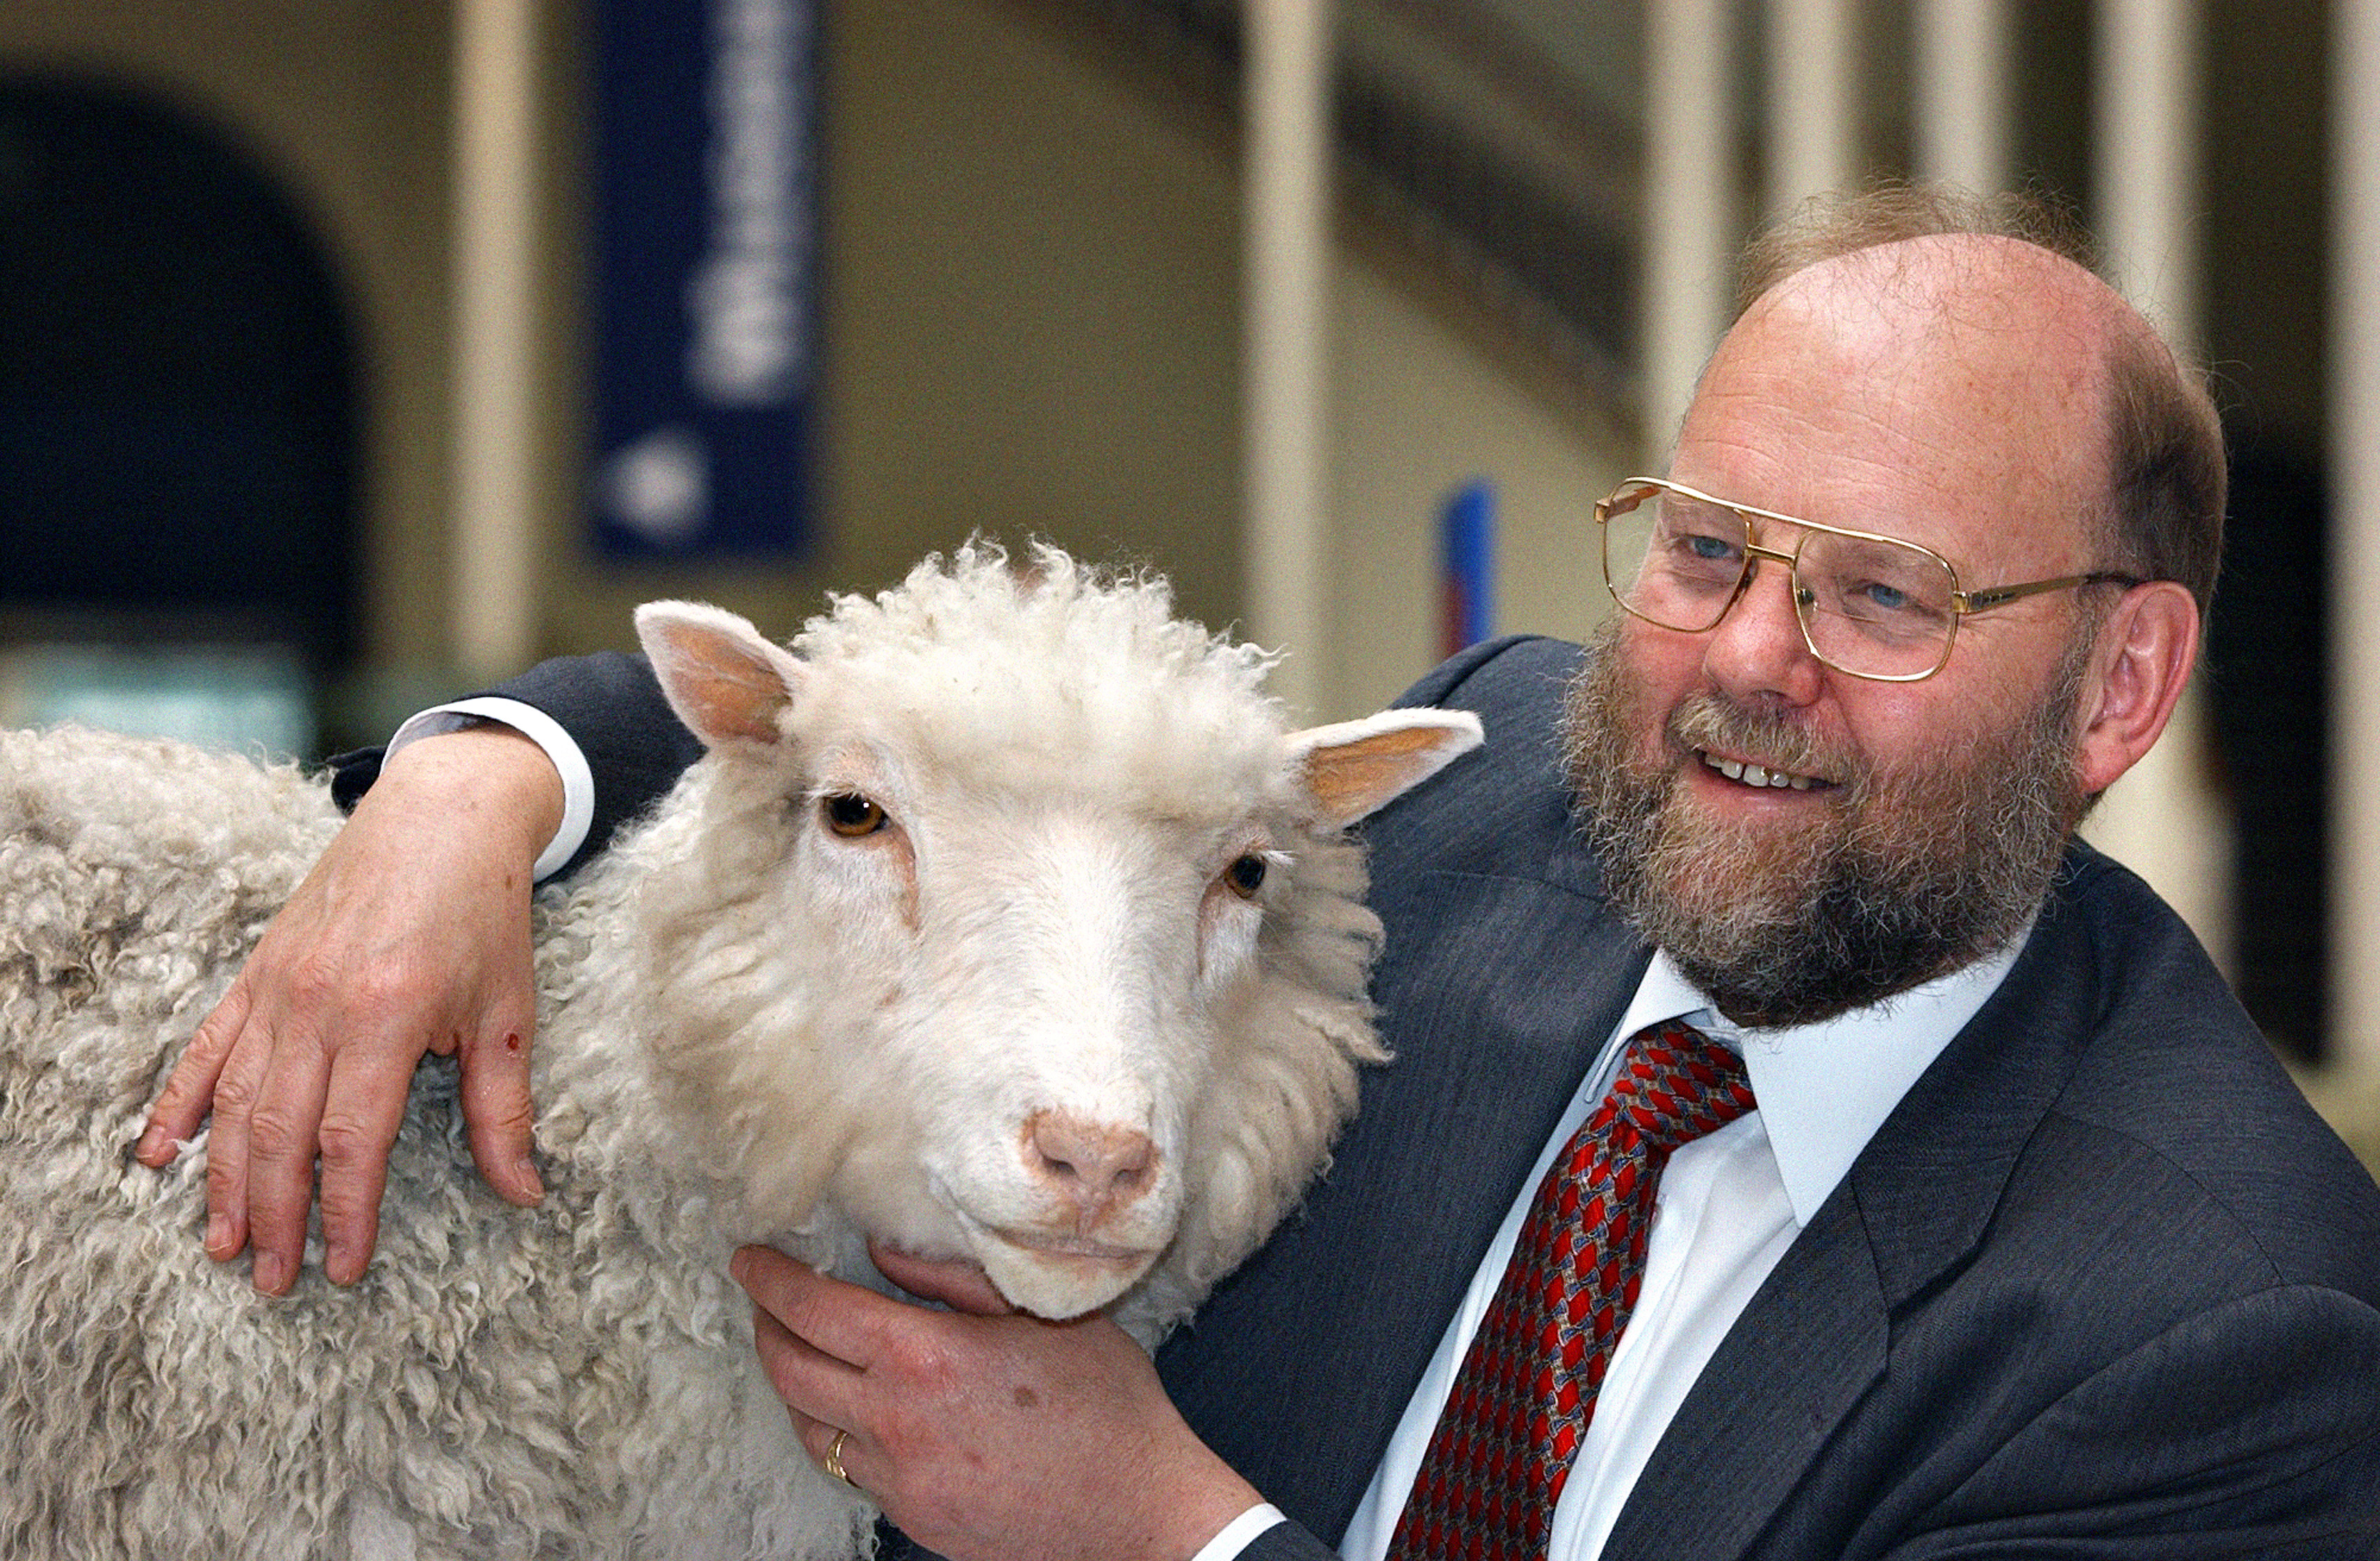 Professor Ian Wilmut with Dolly the sheep – the first mammal cloned from an adult cell